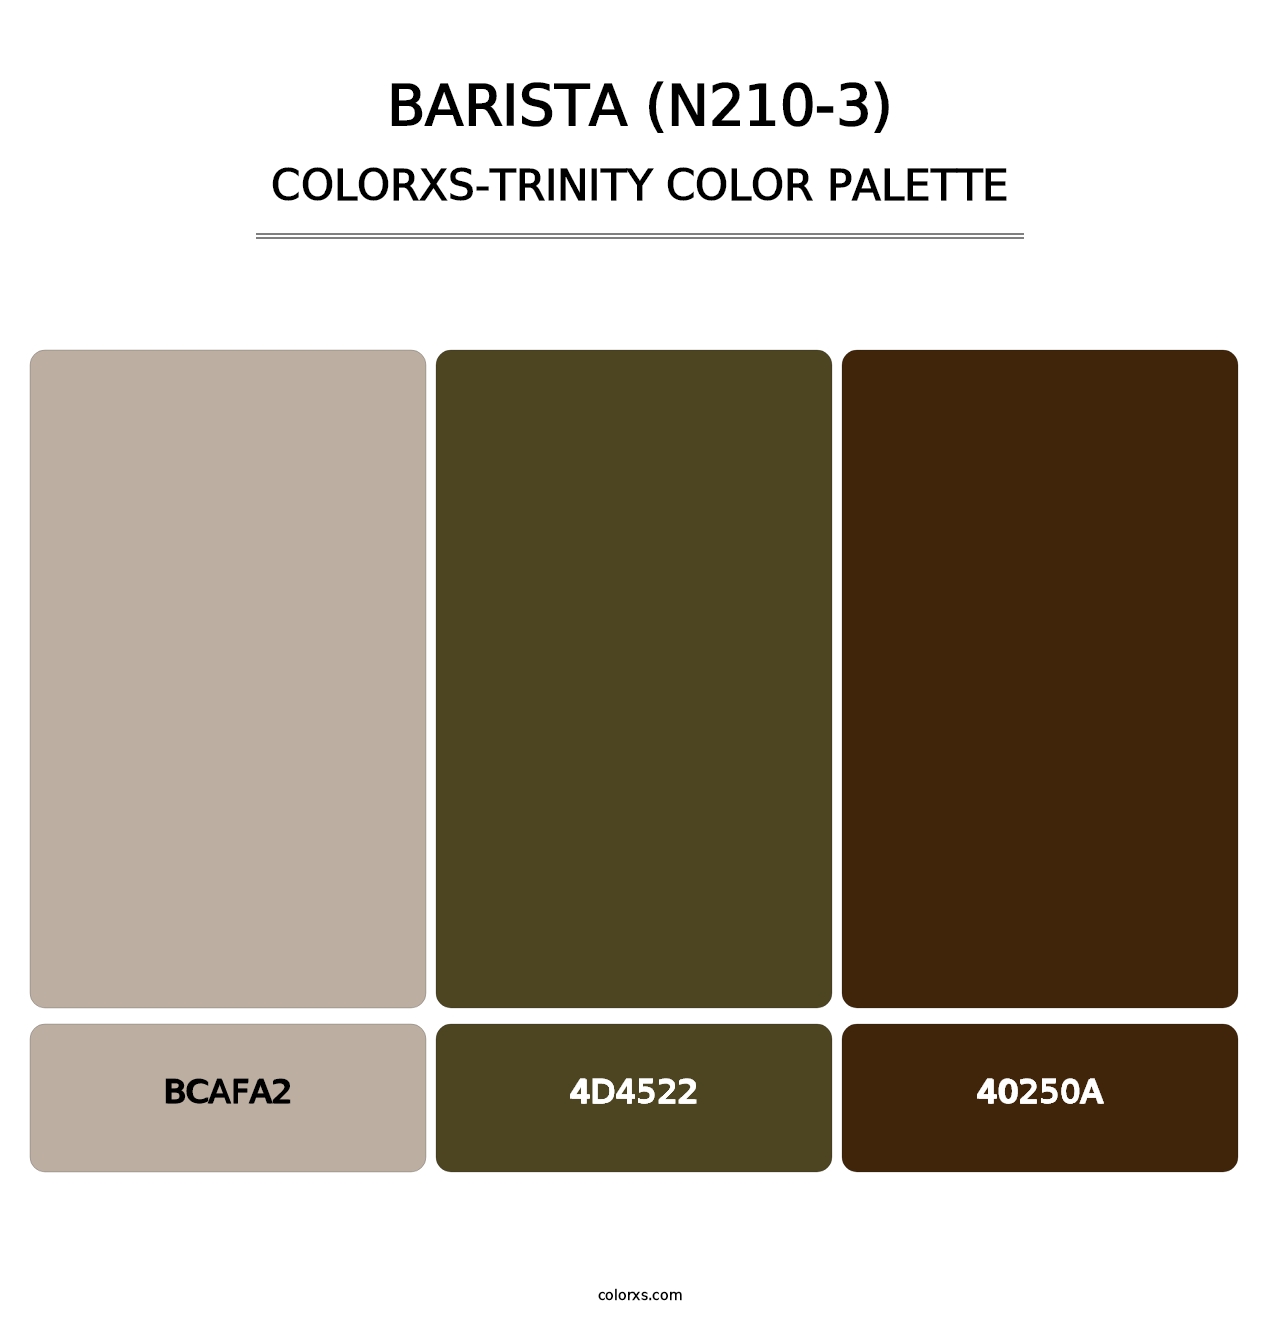 Barista (N210-3) - Colorxs Trinity Palette